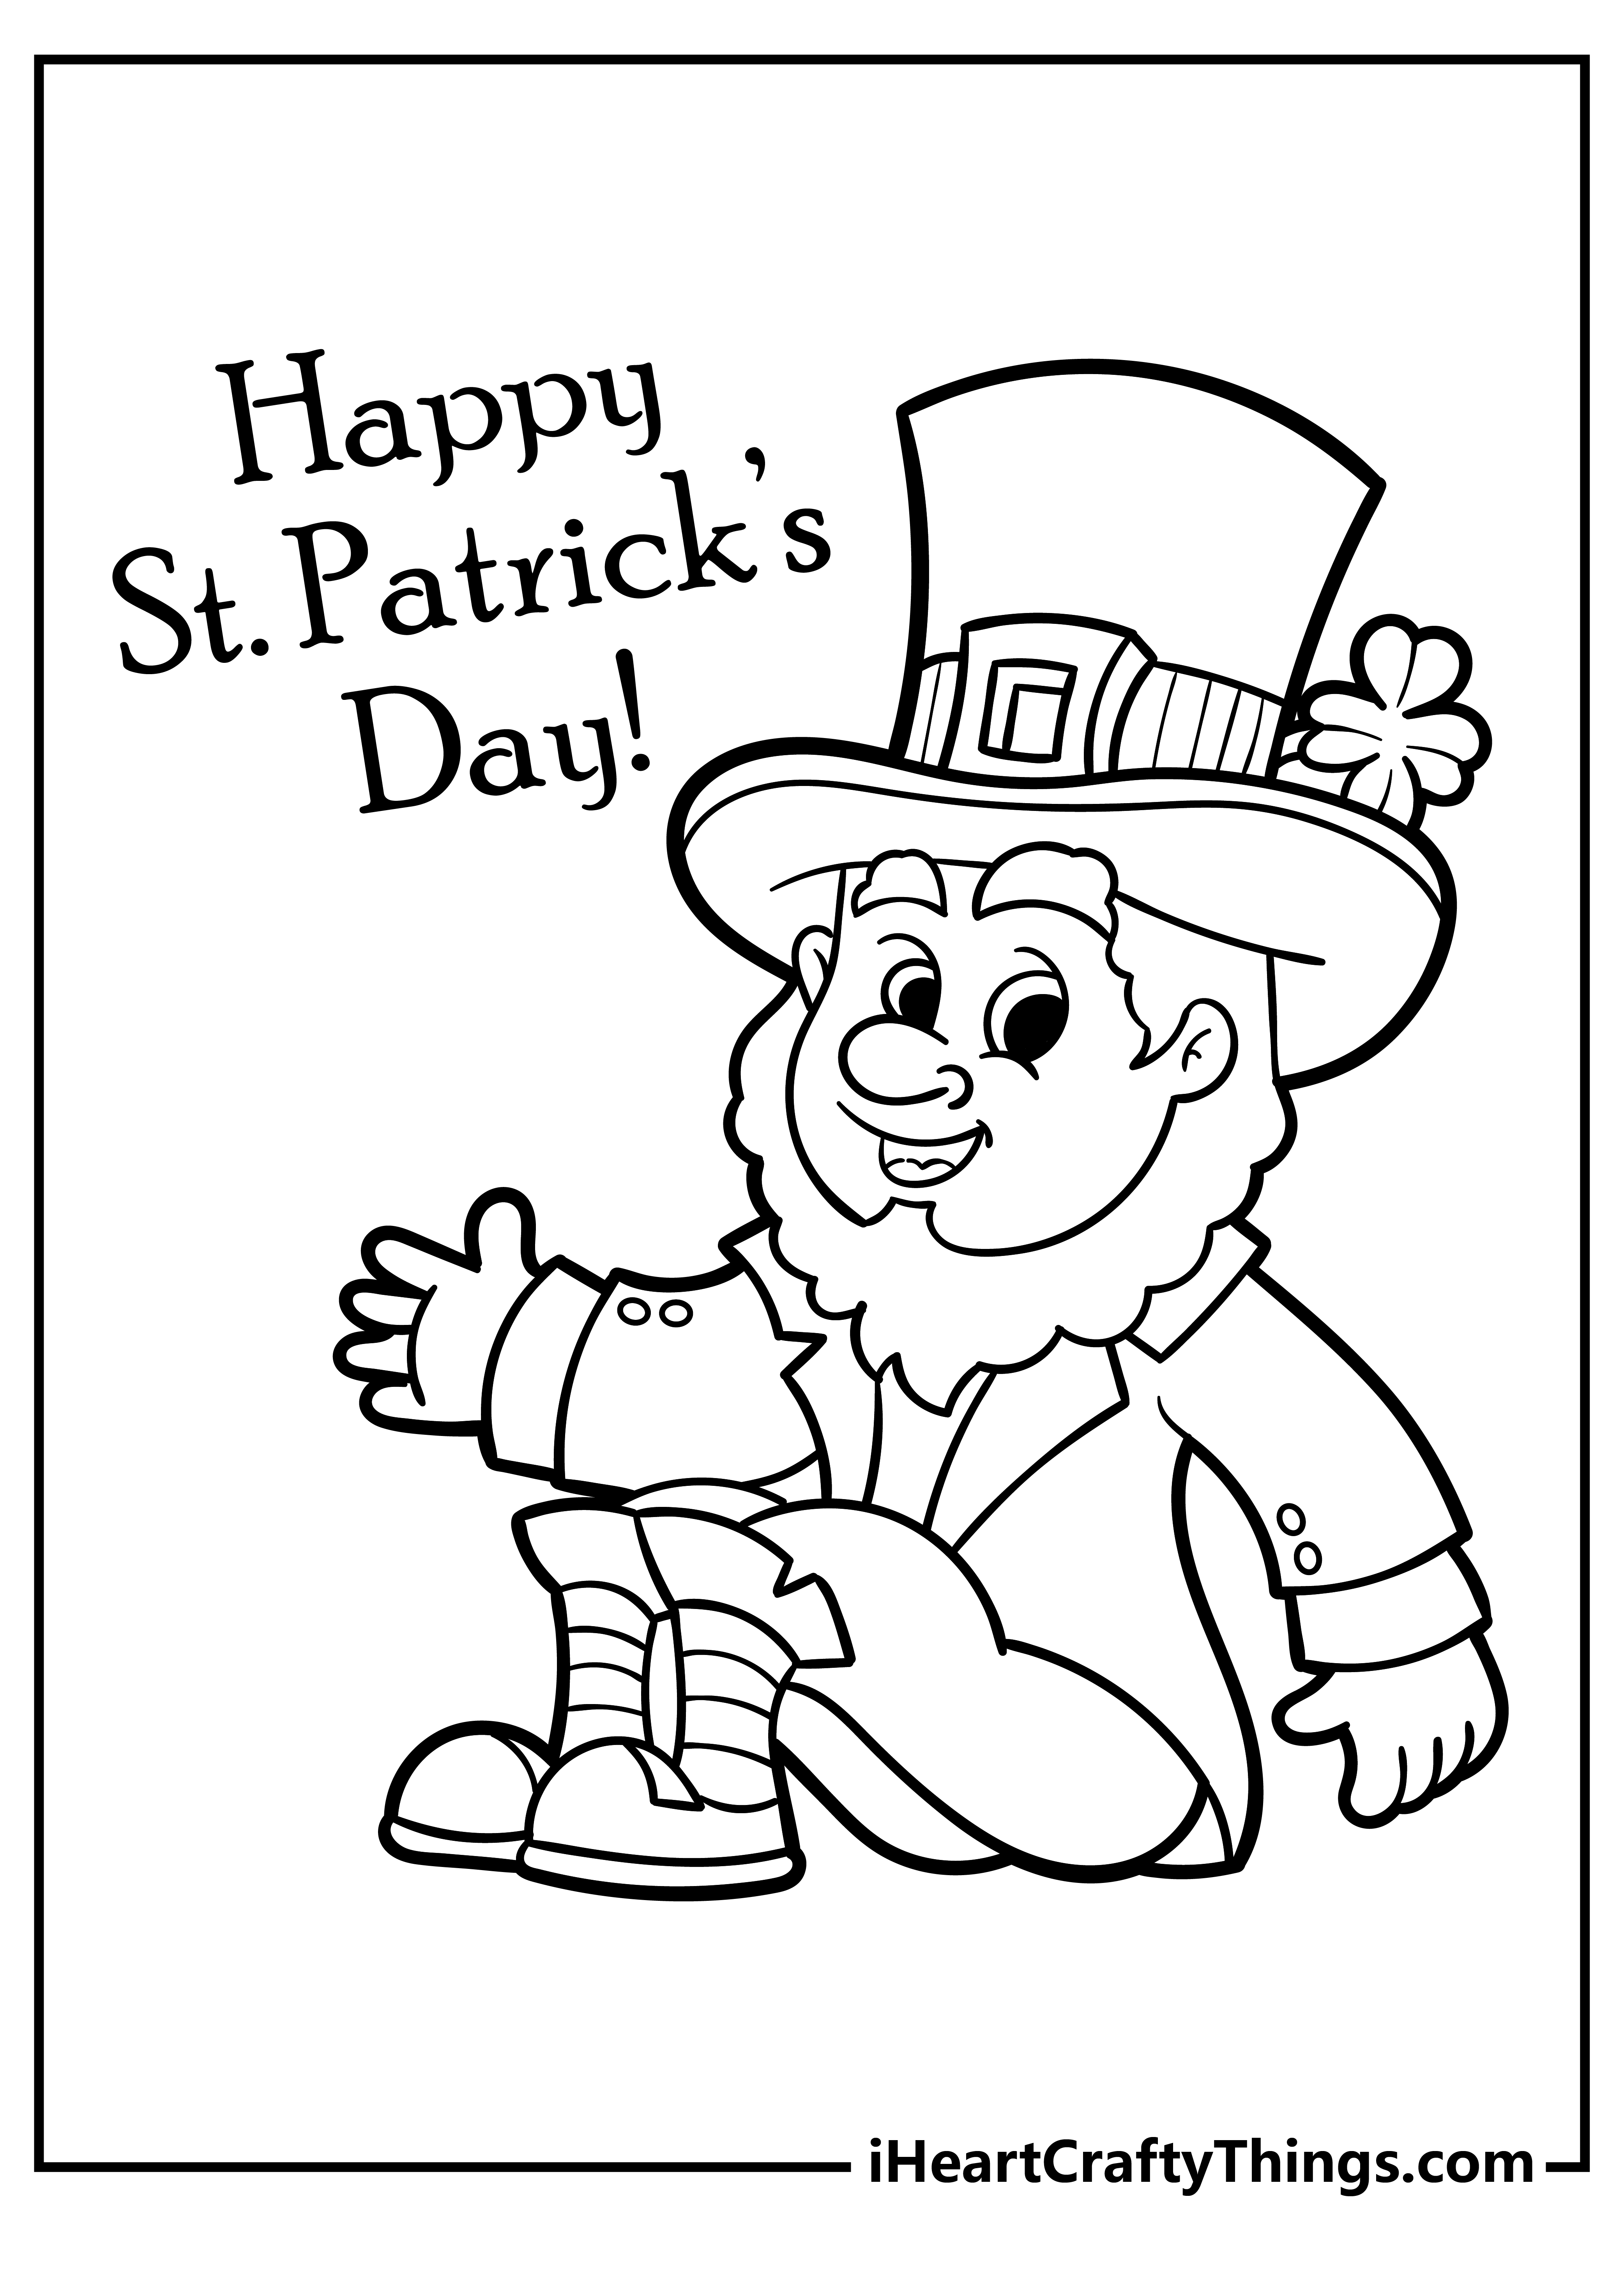 Printable St Patrick's Day Coloring Pages Updated 20